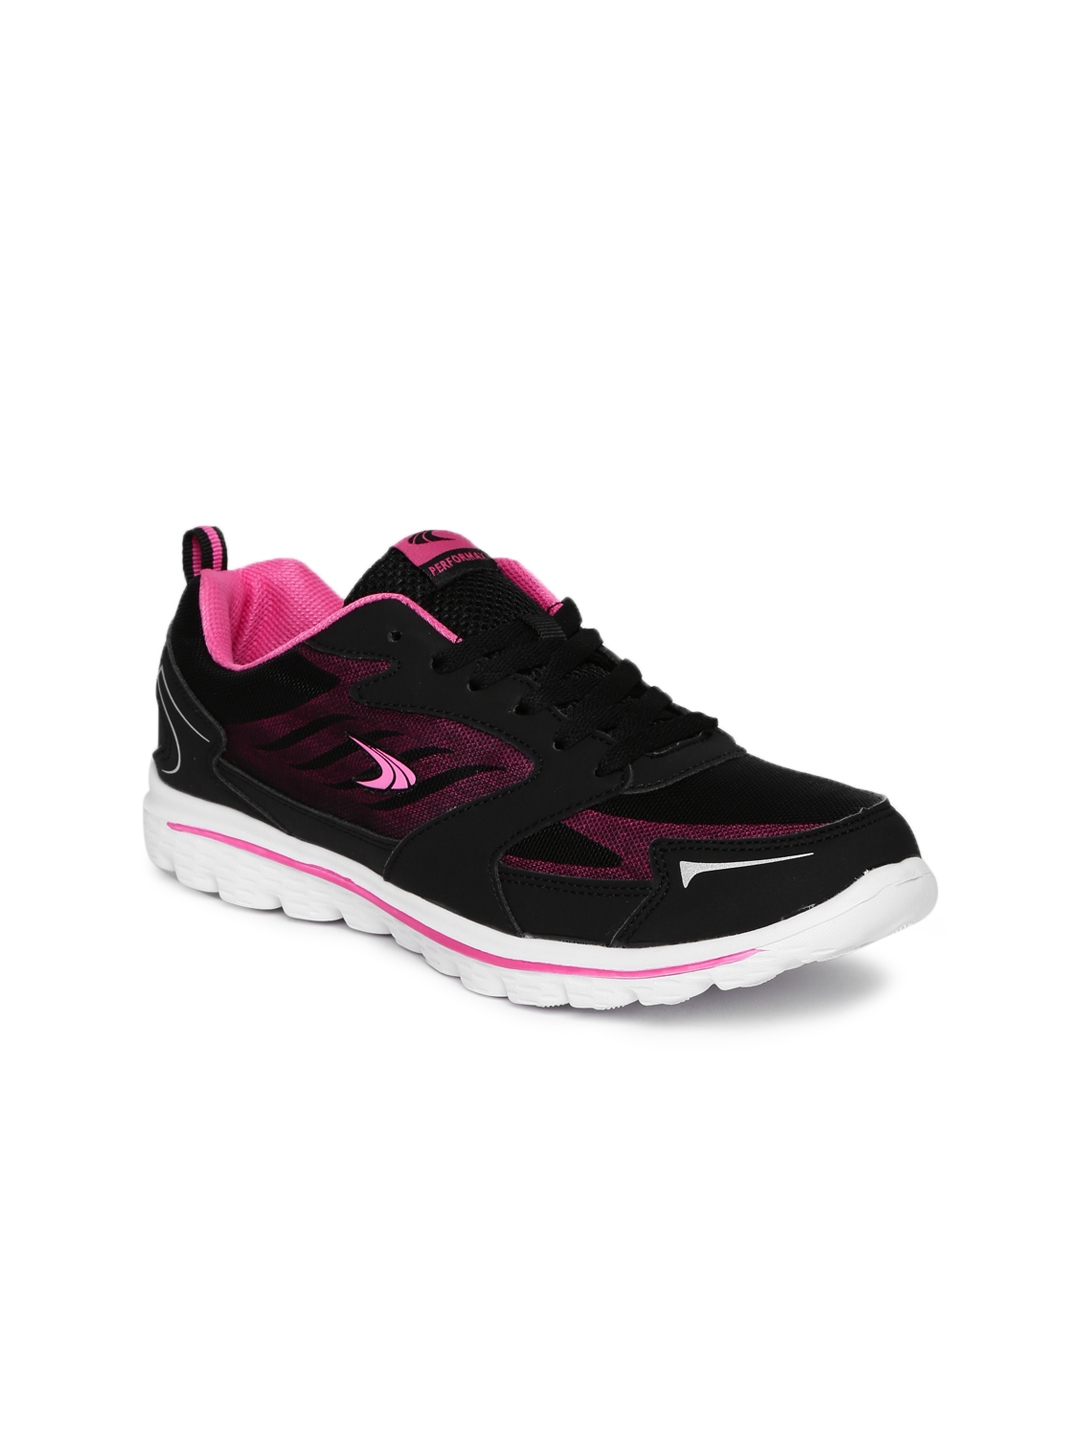 Buy Performax Women Black KX P3009 Running Shoes - Sports Shoes for ...